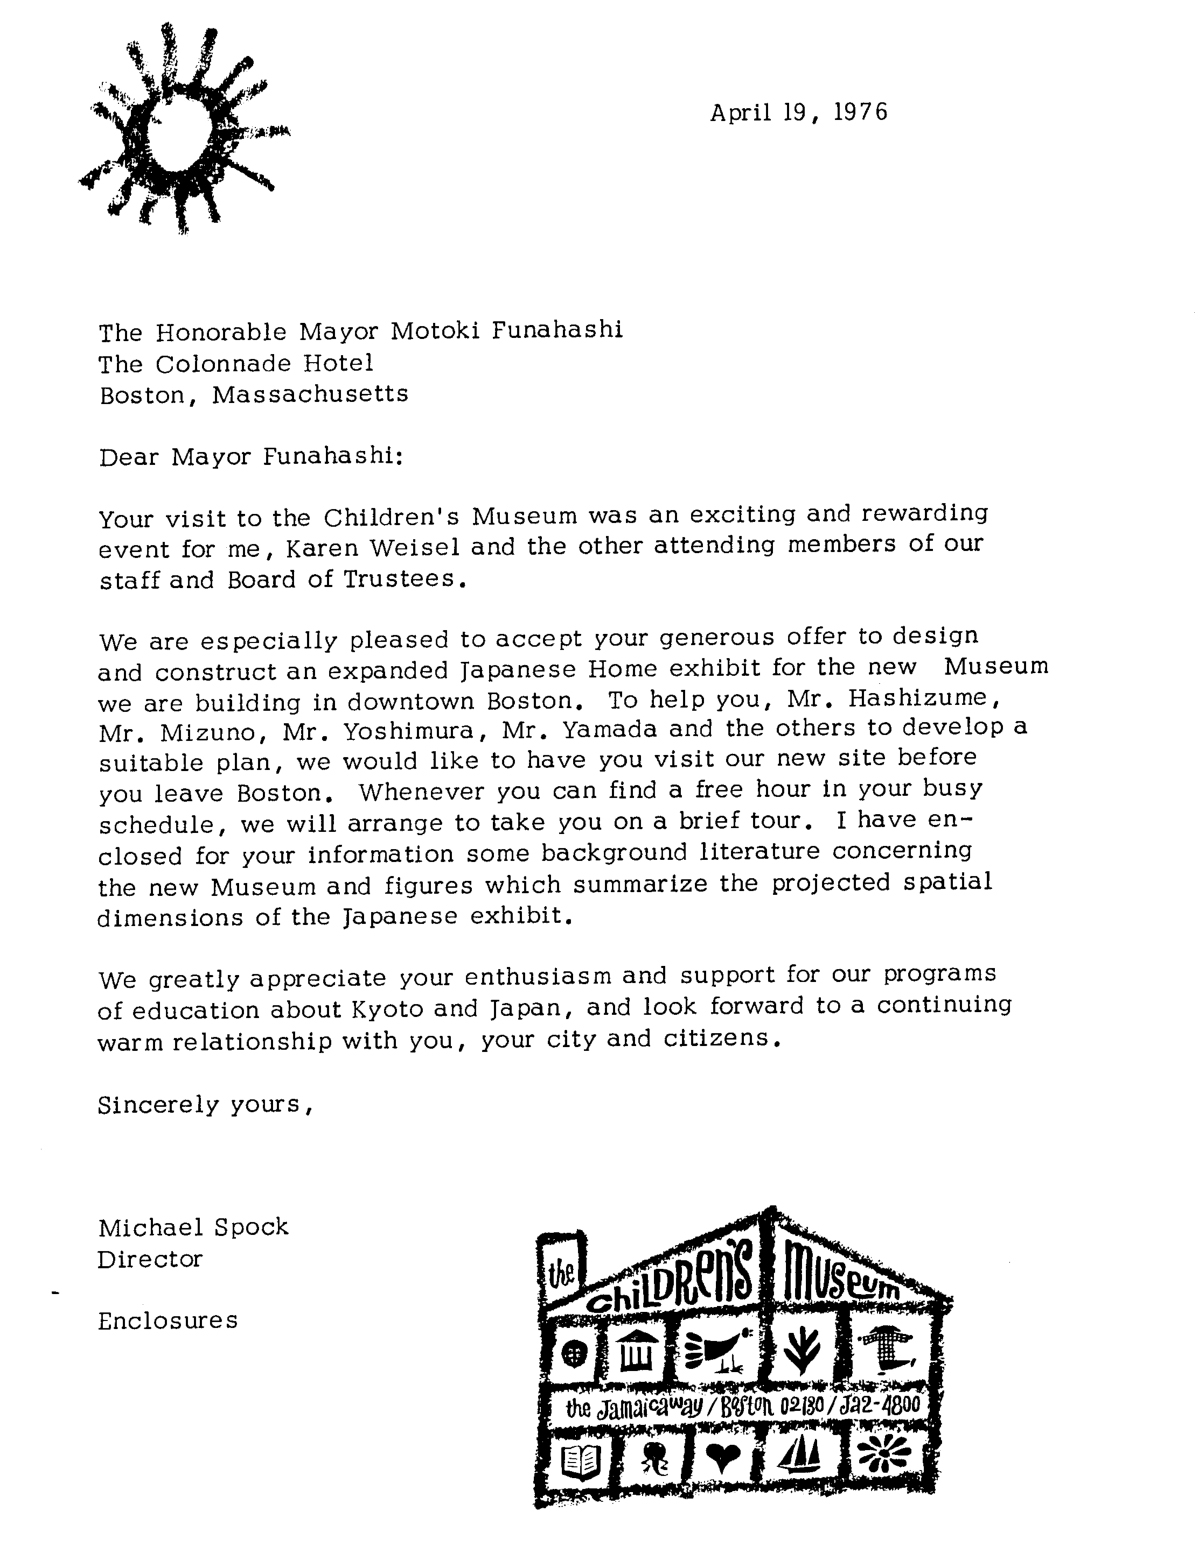 1976 Spock letter accepting house